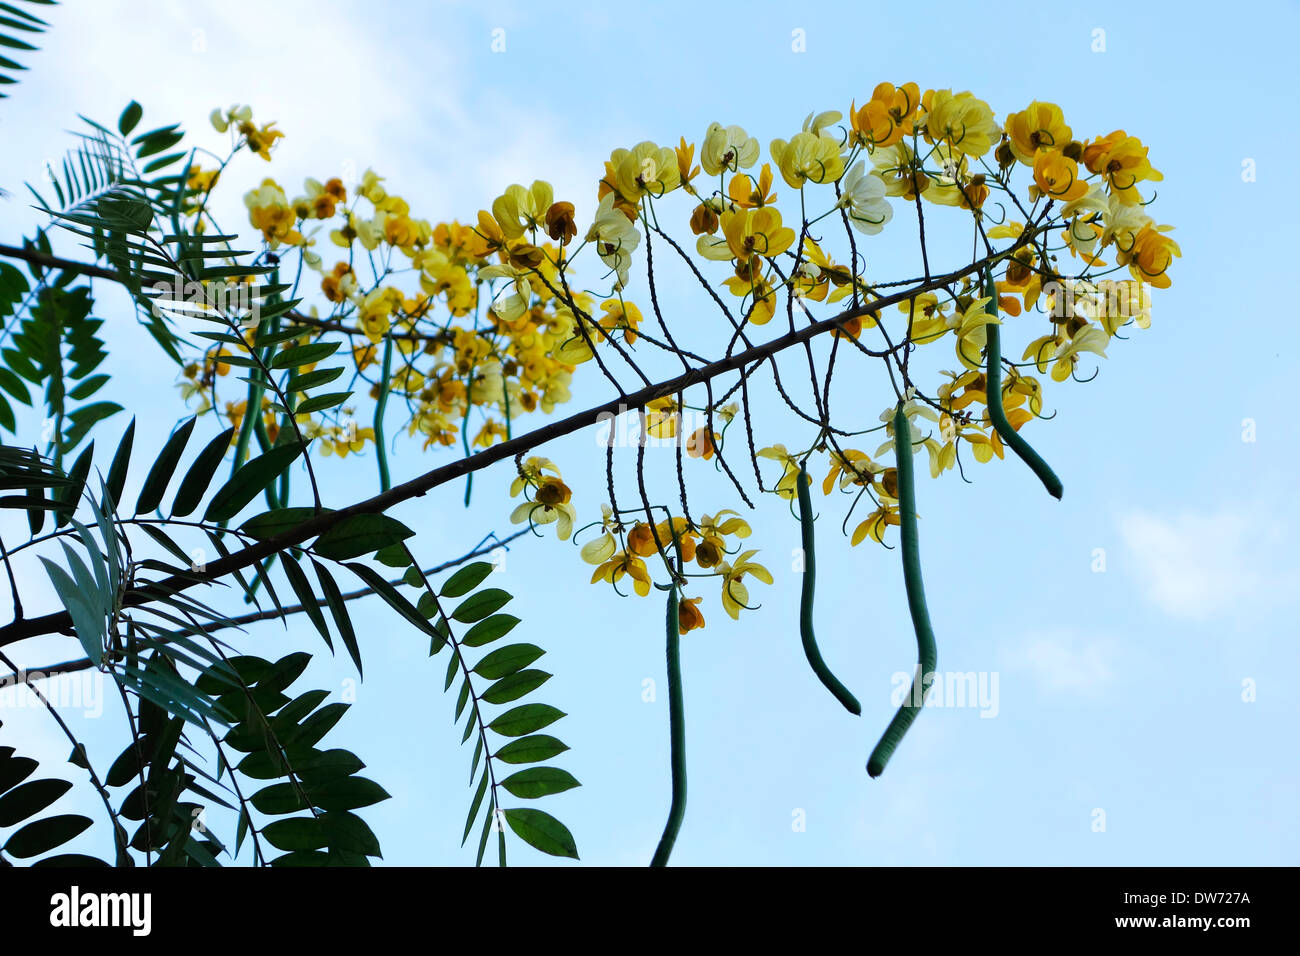 Senna siamea, also known as Kassod Tree, in bloom, Northern Thailand. Stock Photo